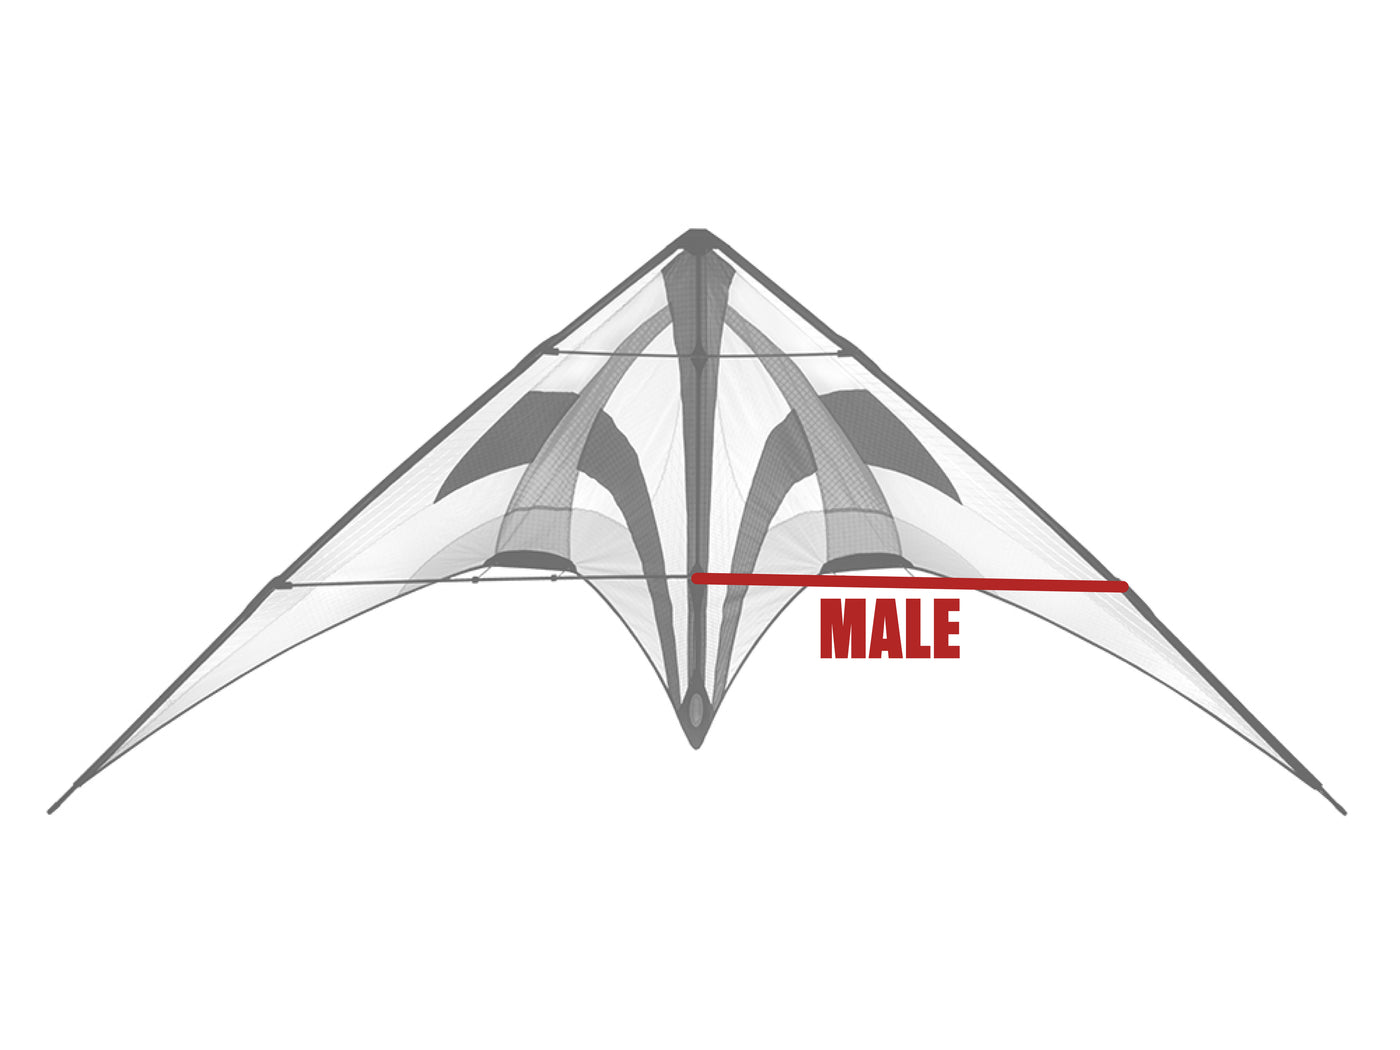 Diagram showing location of the Zephyr Lower Spreader Male on the kite.